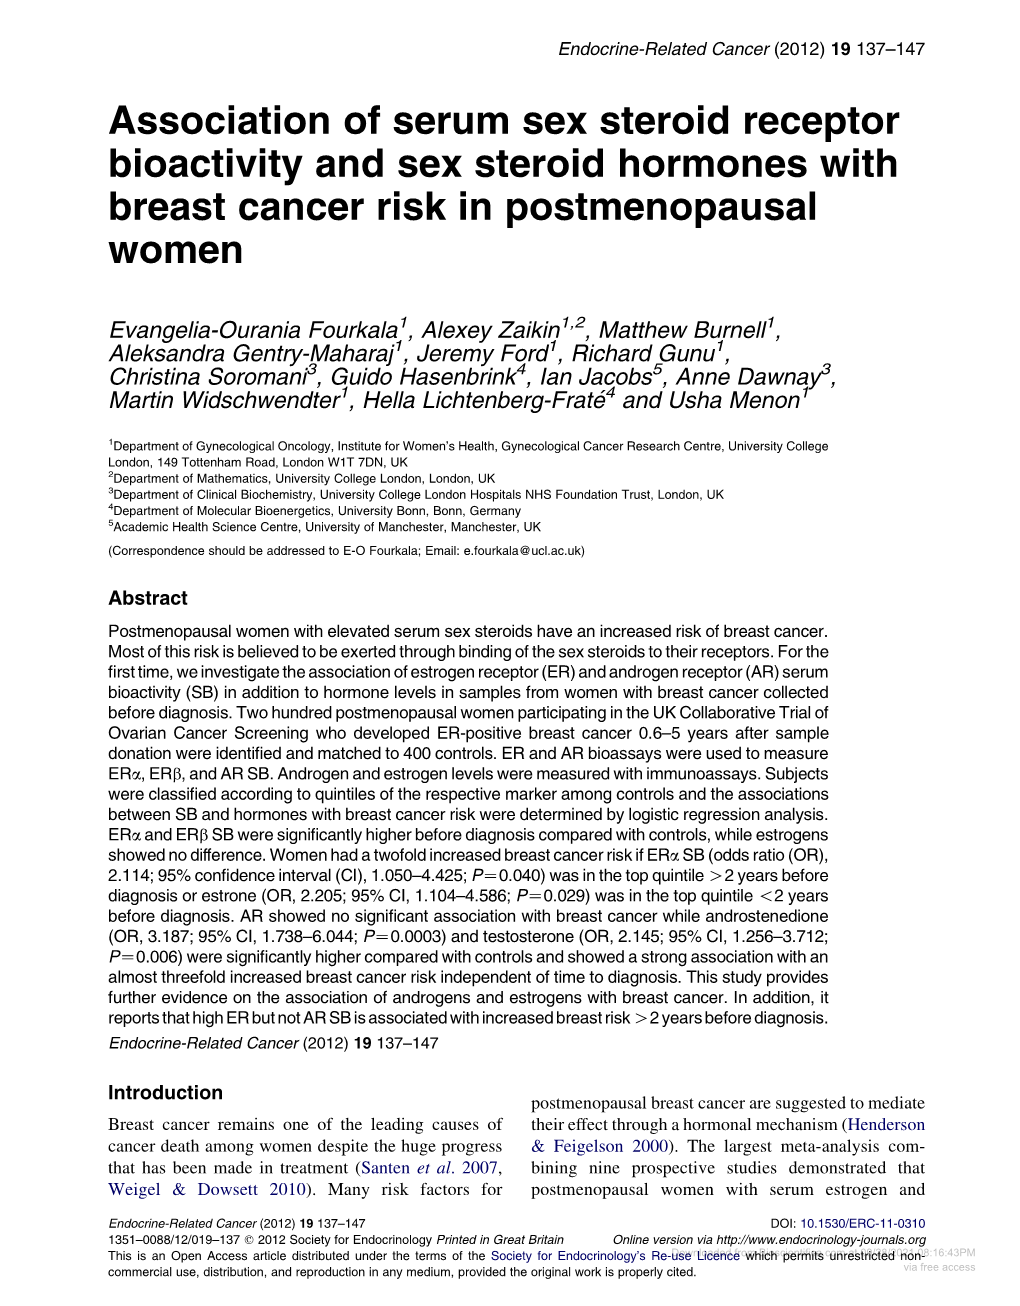 Association of Serum Sex Steroid Receptor Bioactivity and Sex Steroid Hormones with Breast Cancer Risk in Postmenopausal Women